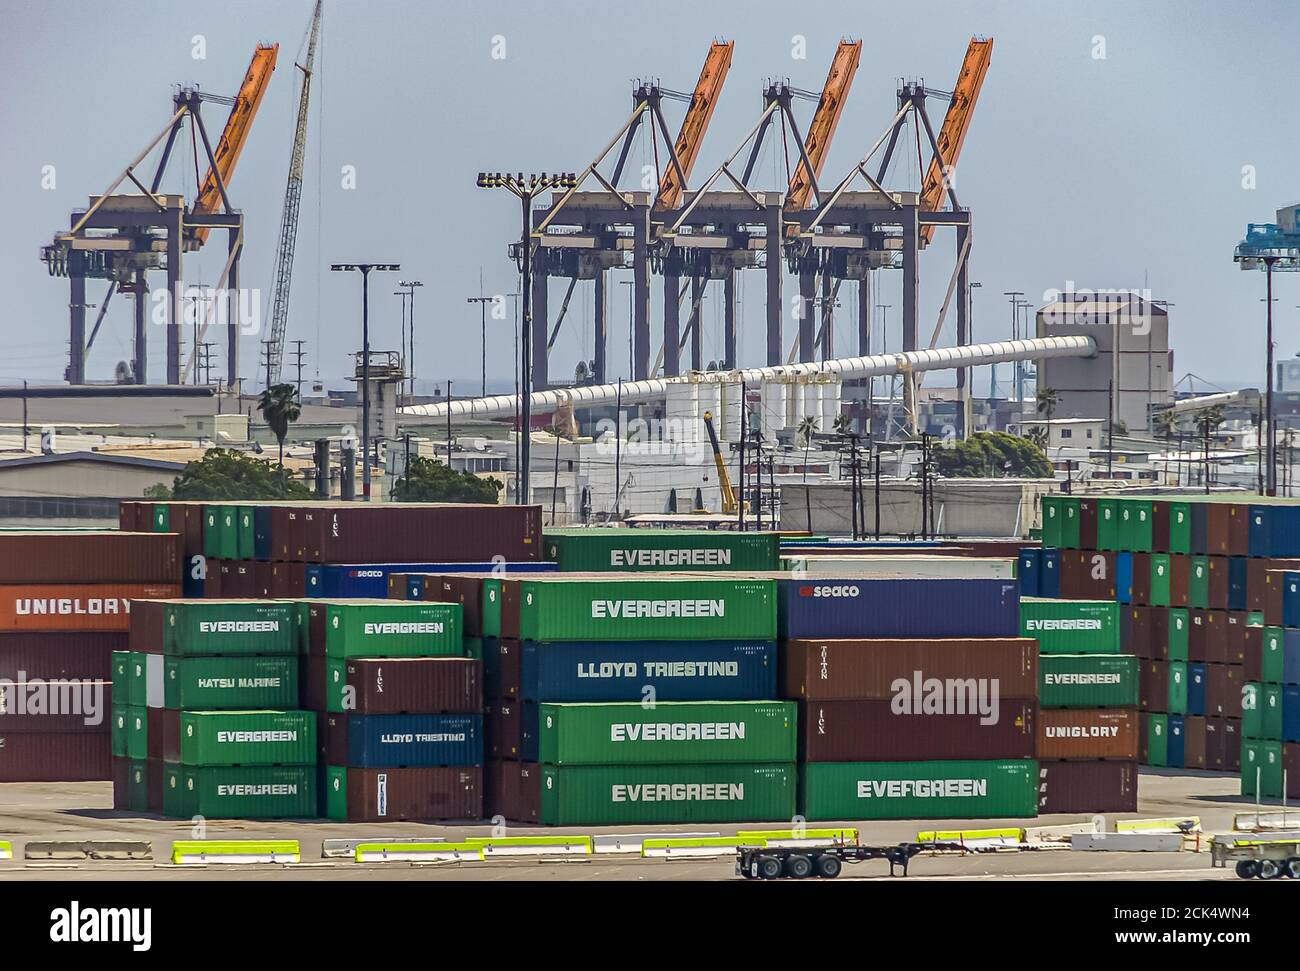 Los Angeles, USA - April 20, 2008: San Pedro harbor. Detail of Evergreen container yard with stacks of boxes and cranes under light blue sky. Stock Photo